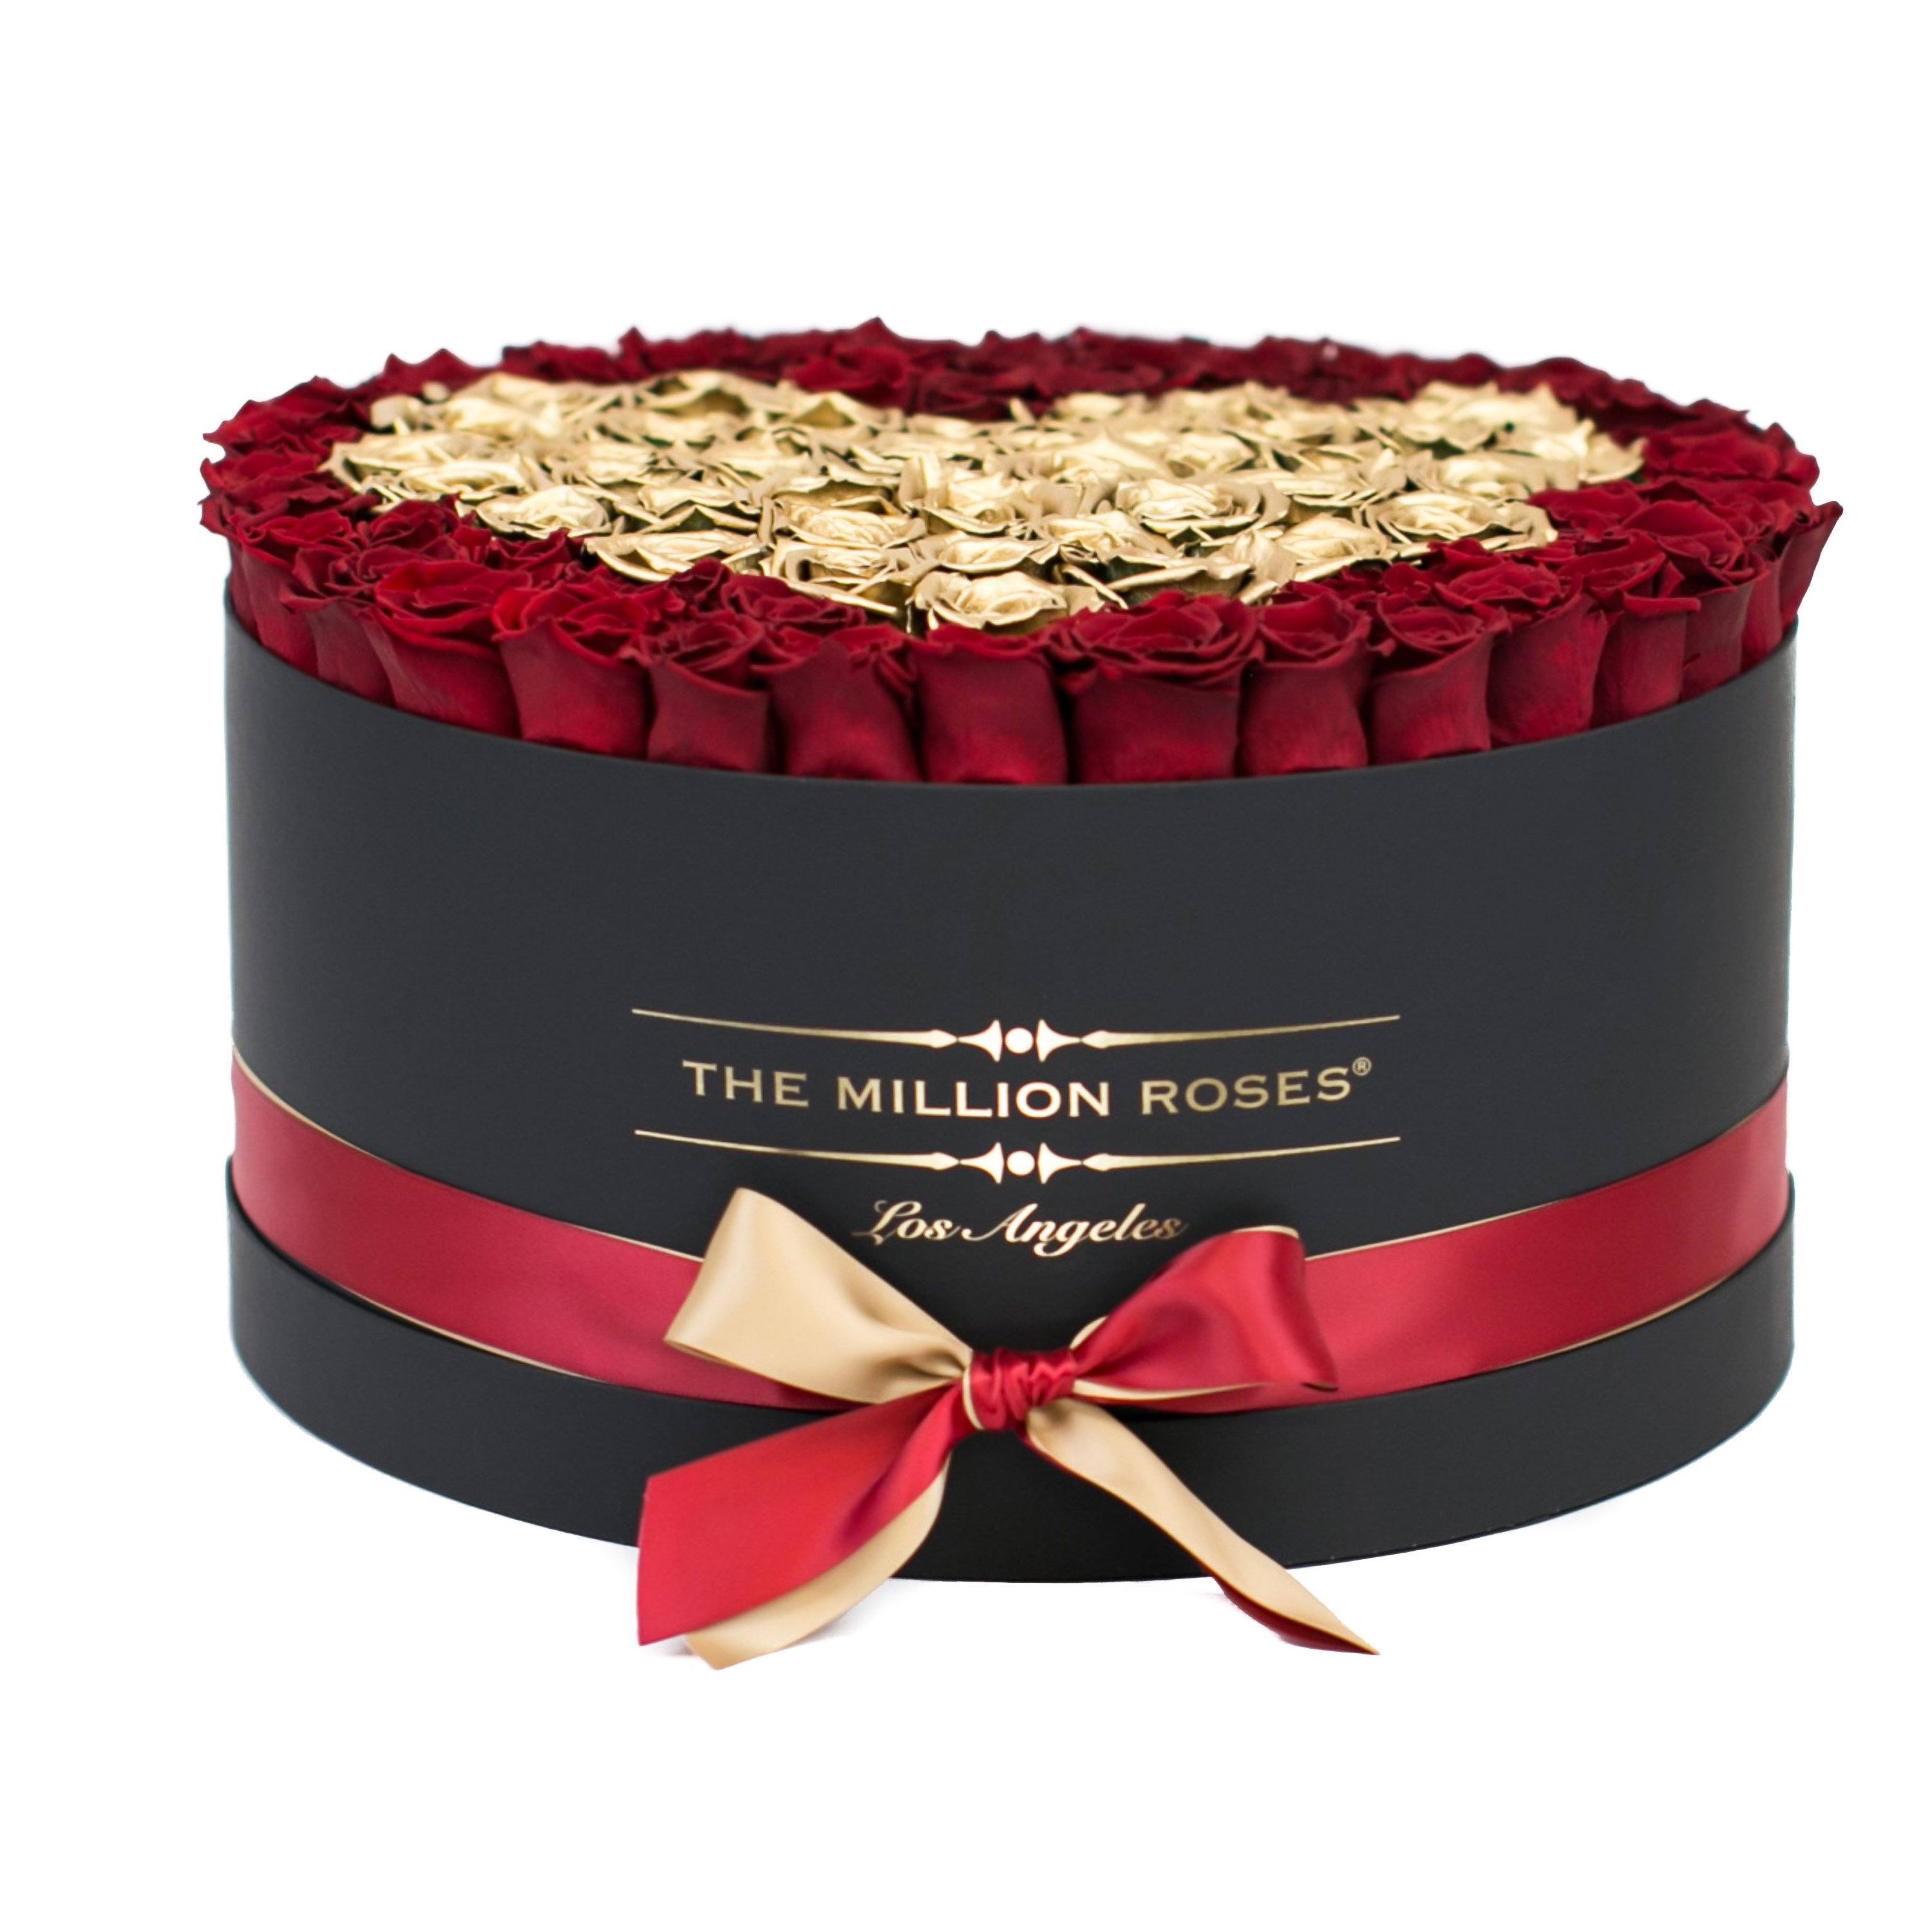 the million LARGE box - black - red&gold(heart) ETERNITY roses red eternity roses - the million roses